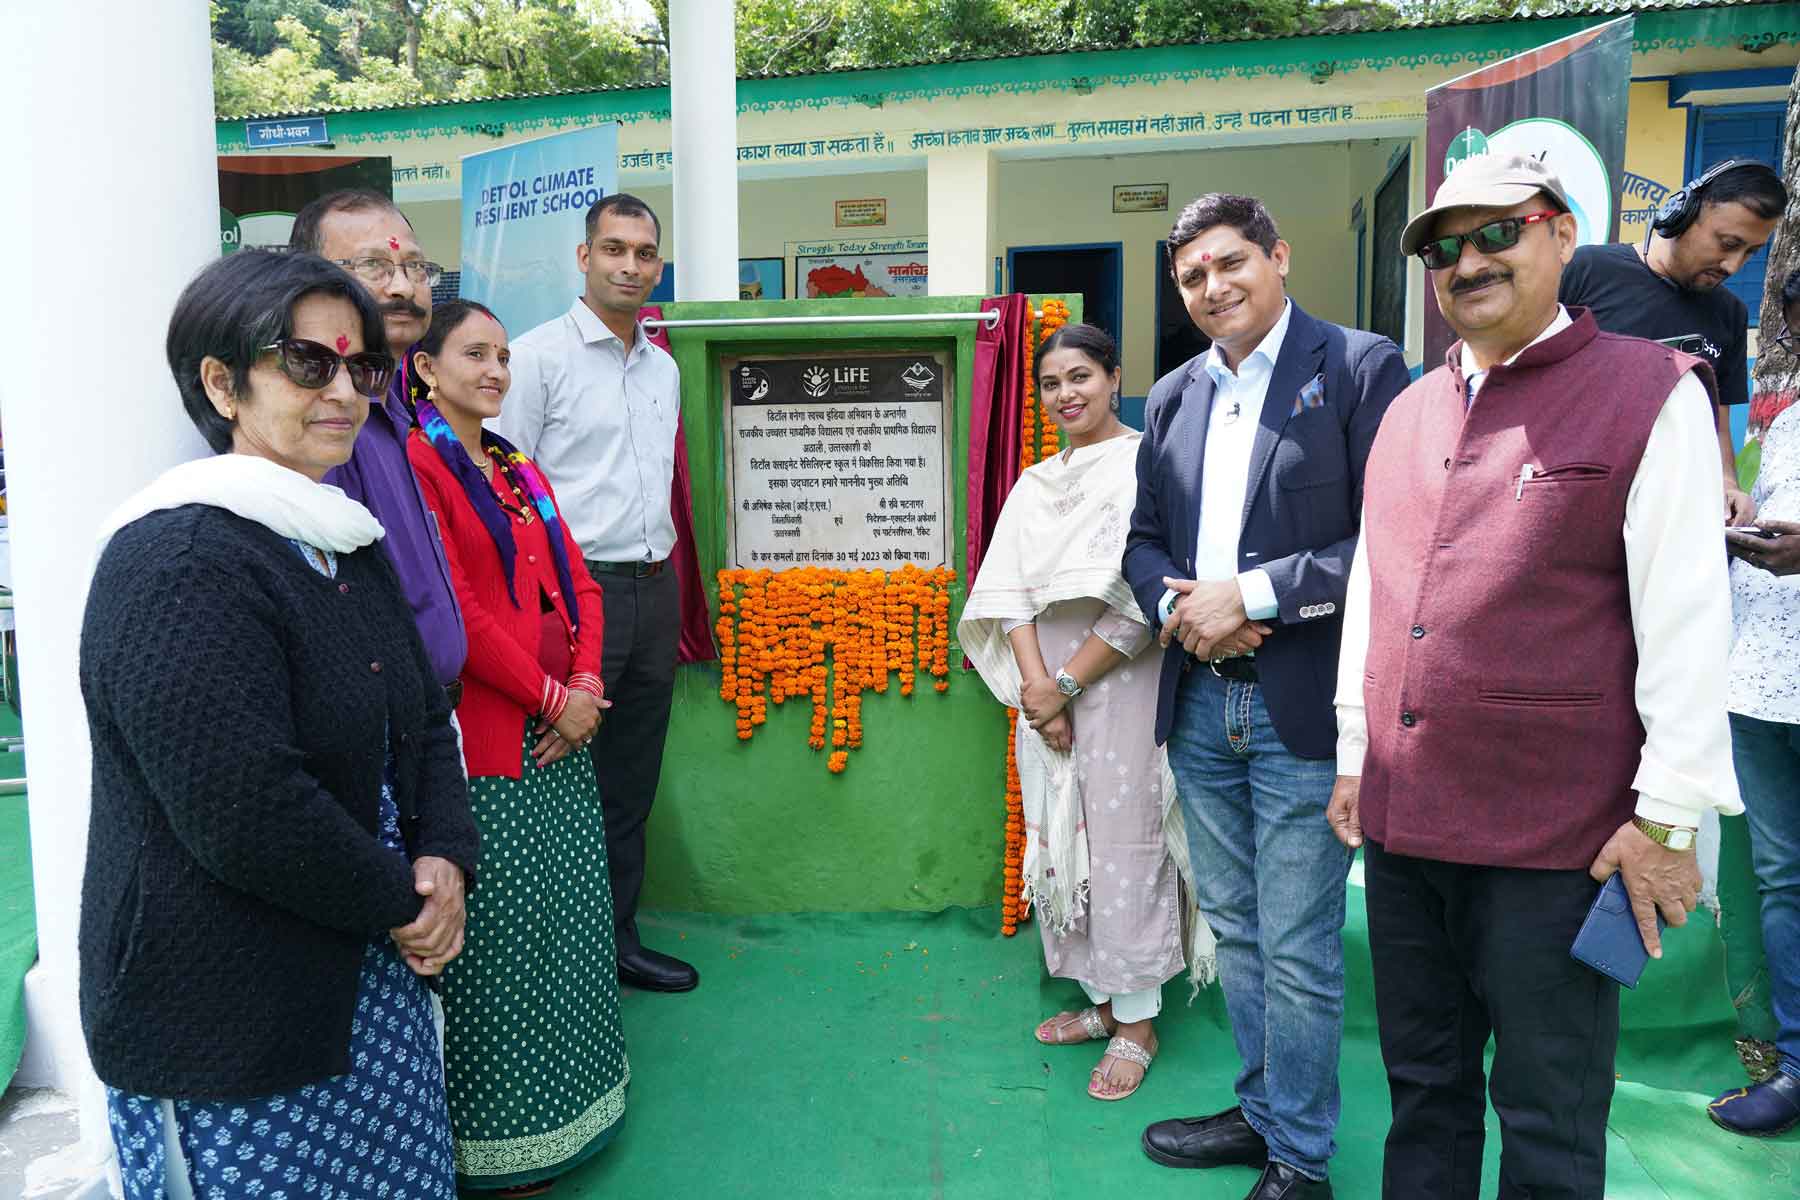 Unveiling of Dettol Climate Resilient School in Uttarkashi